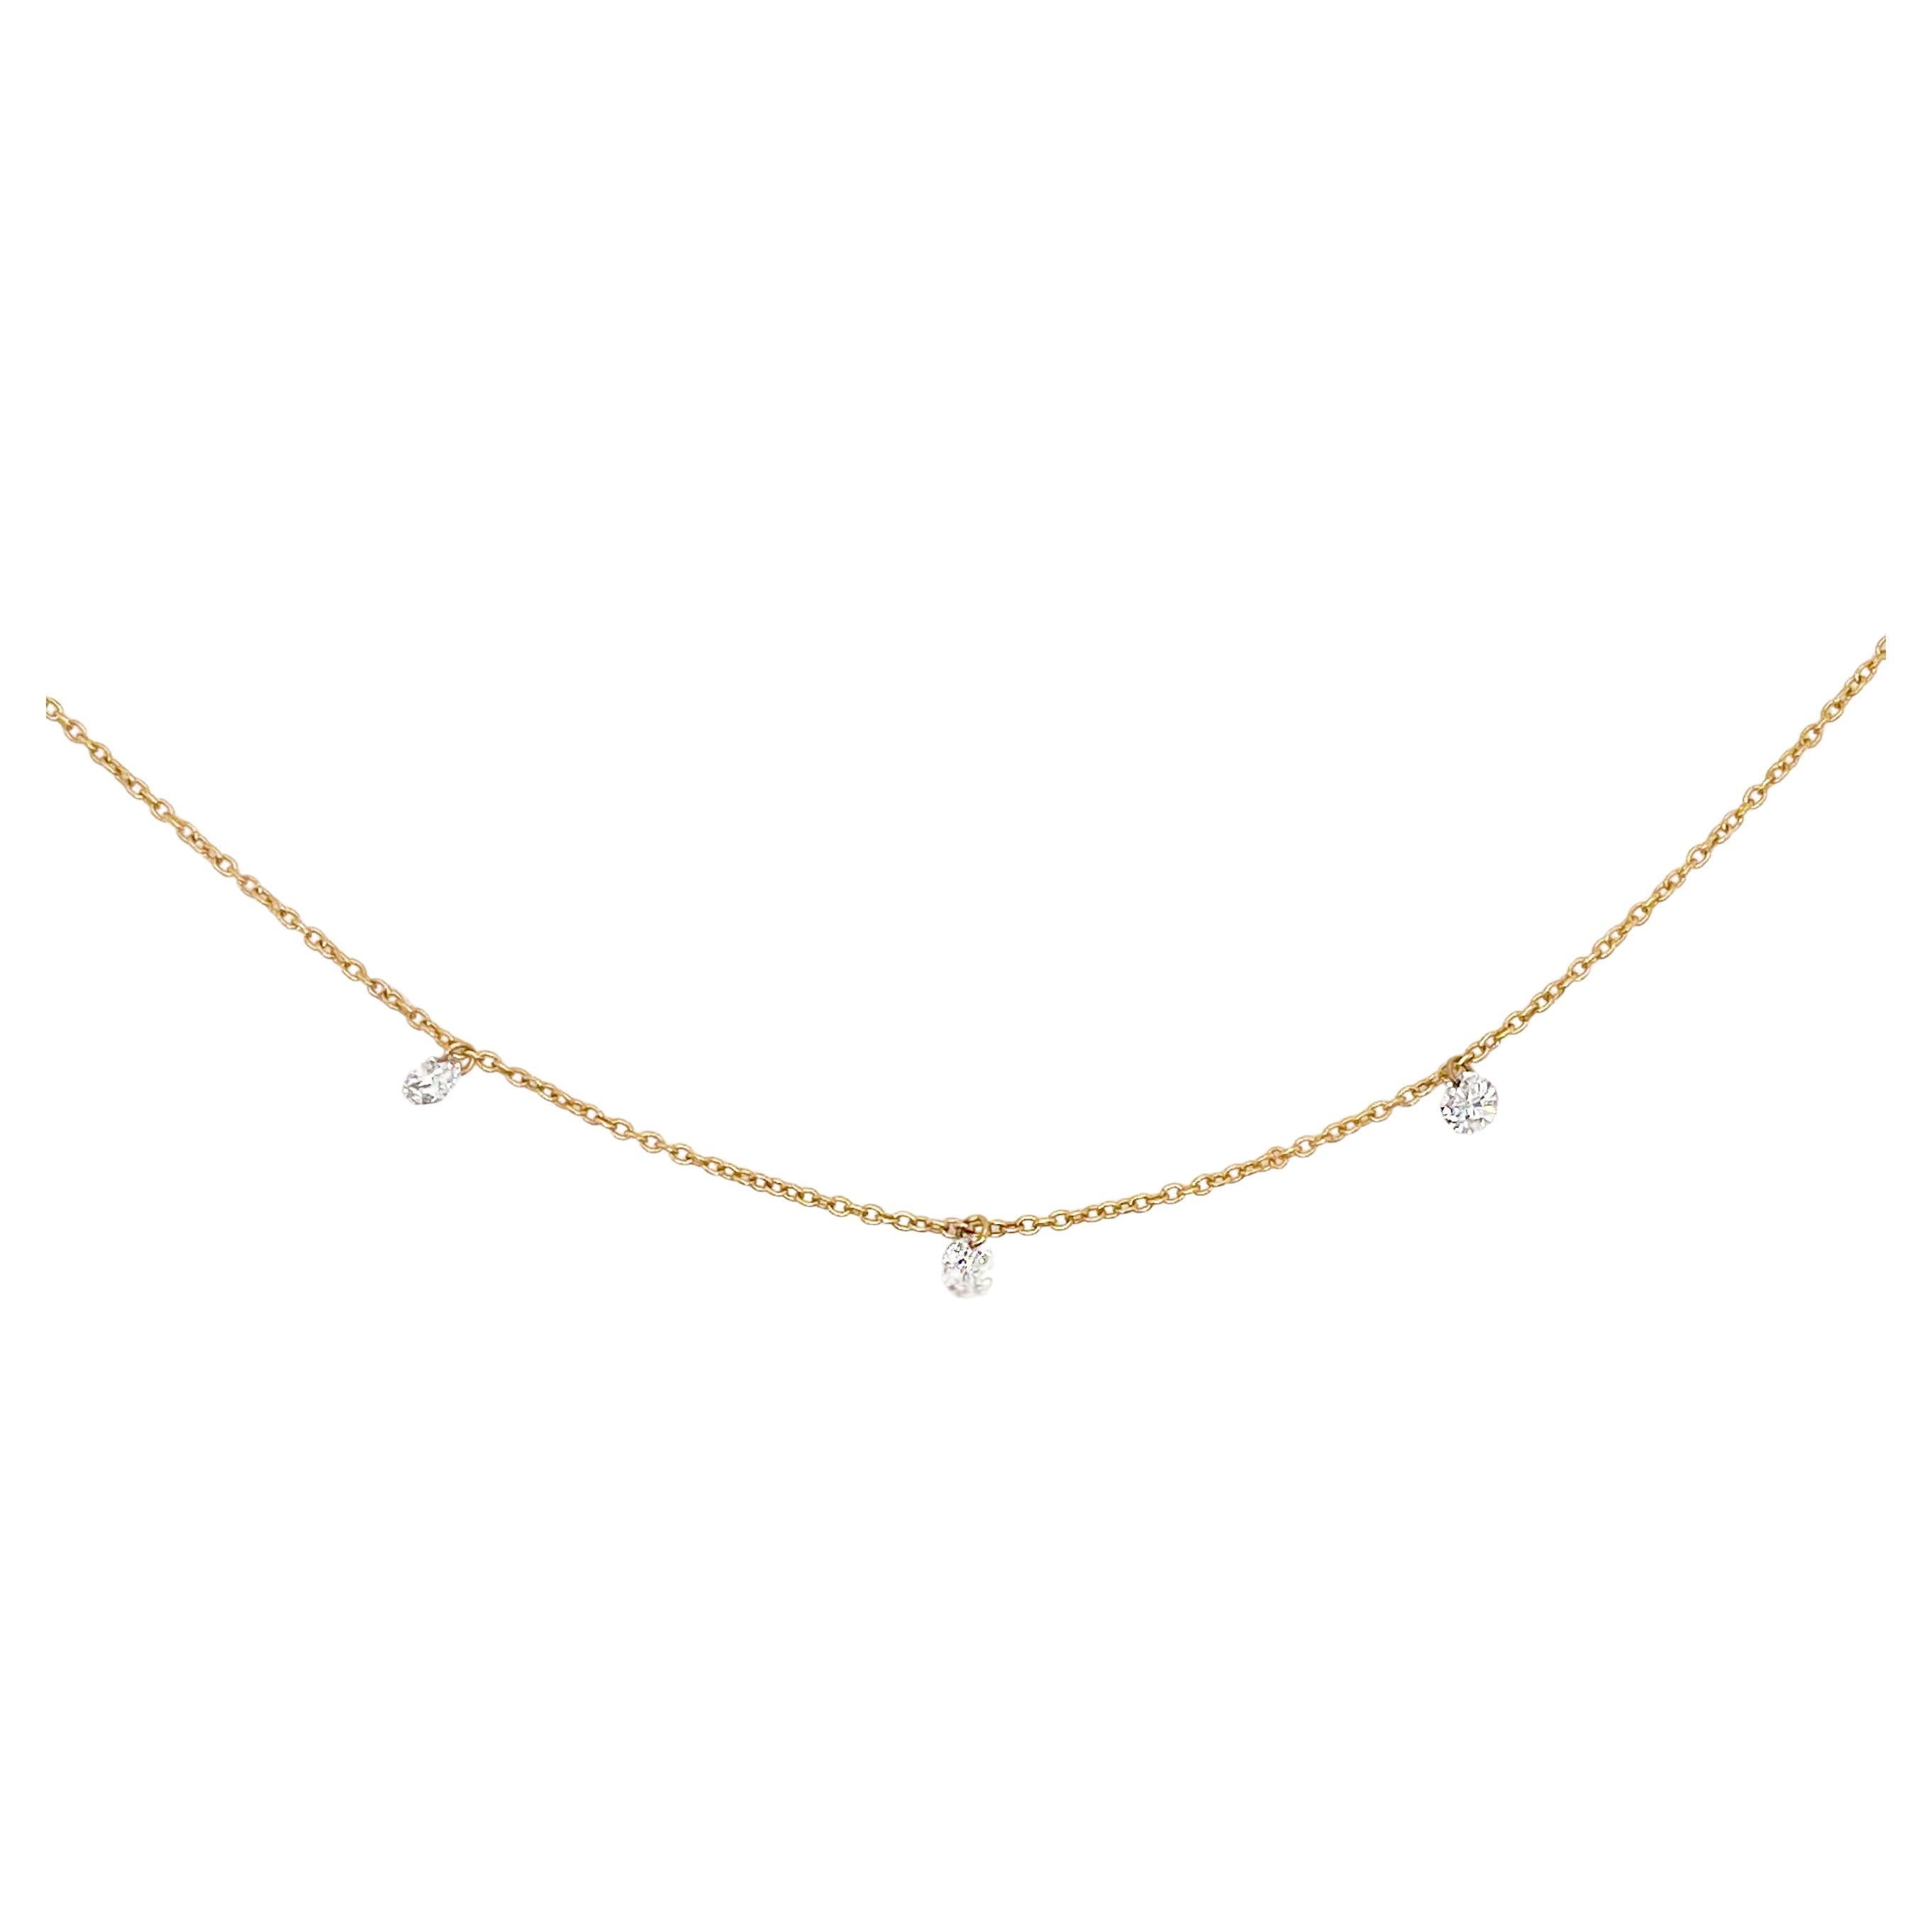 Dancing Diamond Necklace, .30ct Diamond Necklace, Dainty Stackable Necklace For Sale